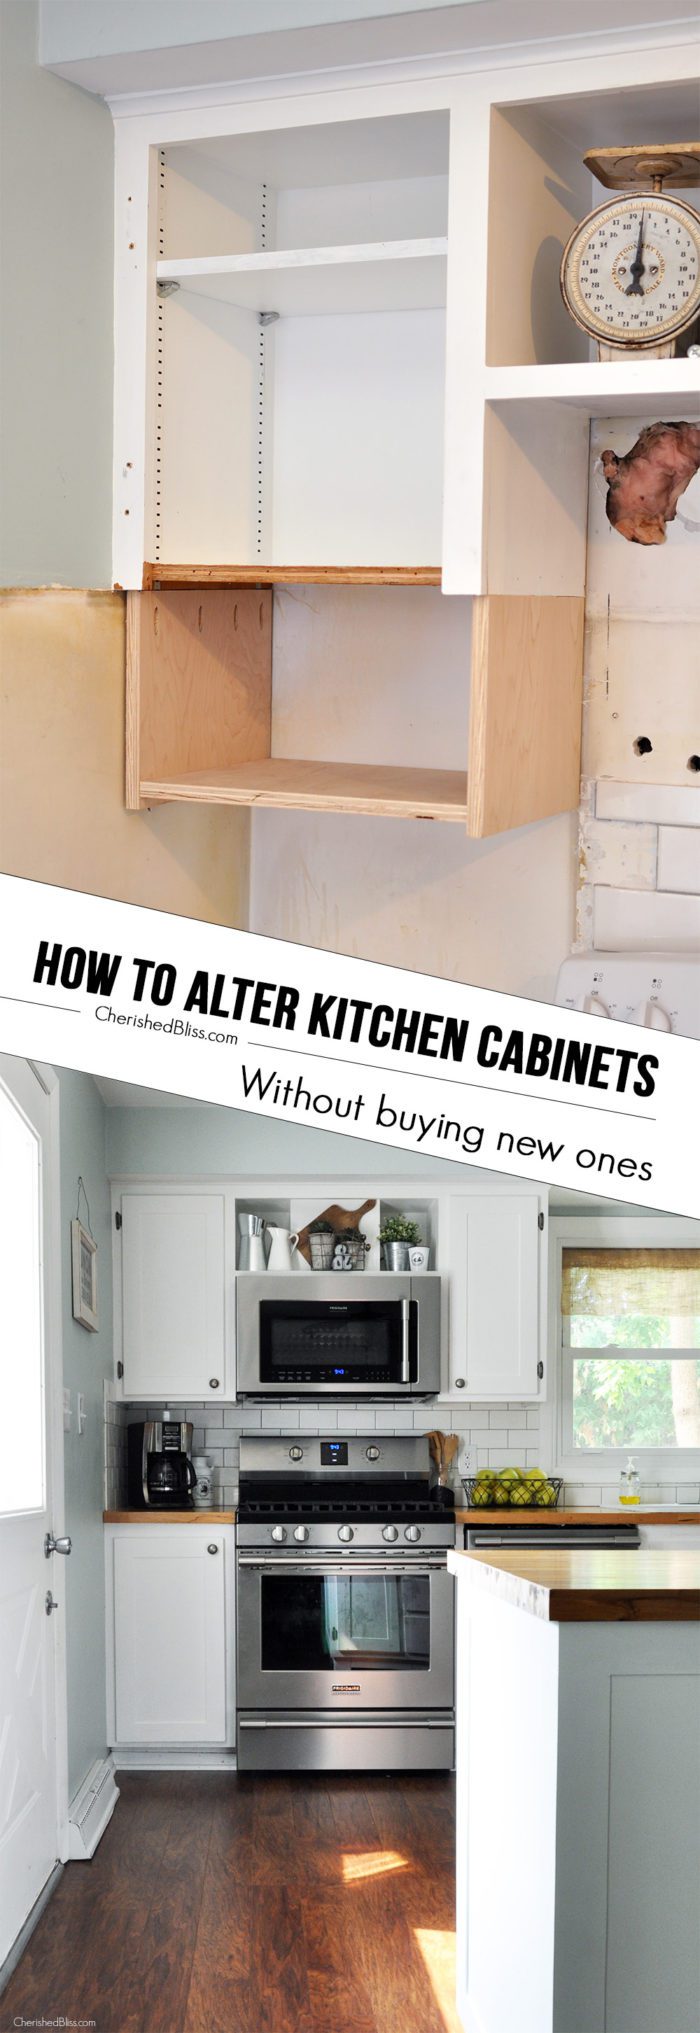 How To Alter Kitchen Cabinets, How To Heighten Kitchen Cabinets